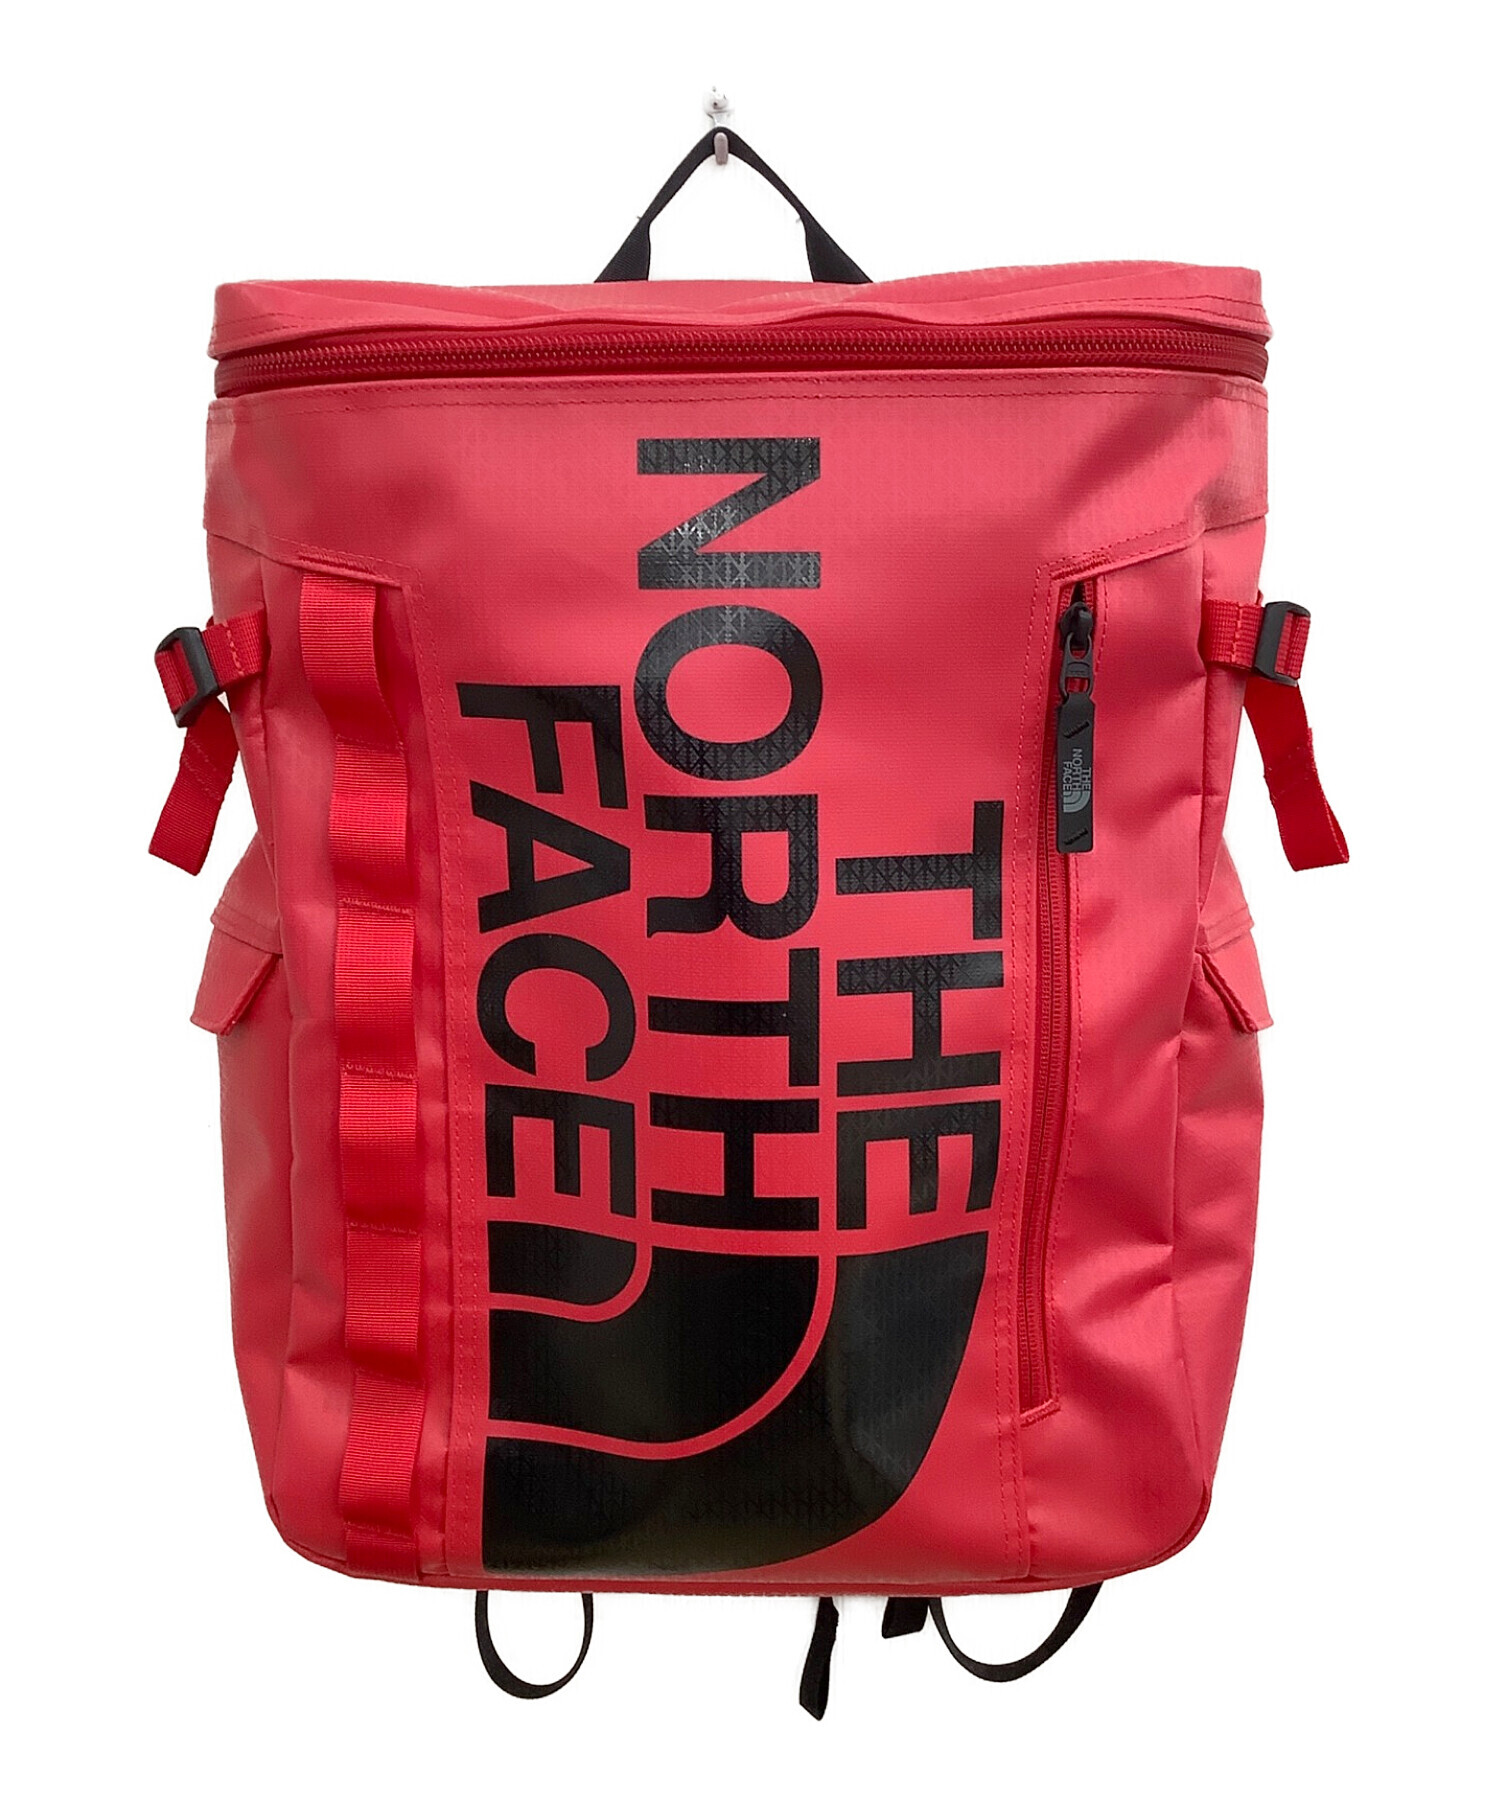 North Face ヒューズボックス レッド